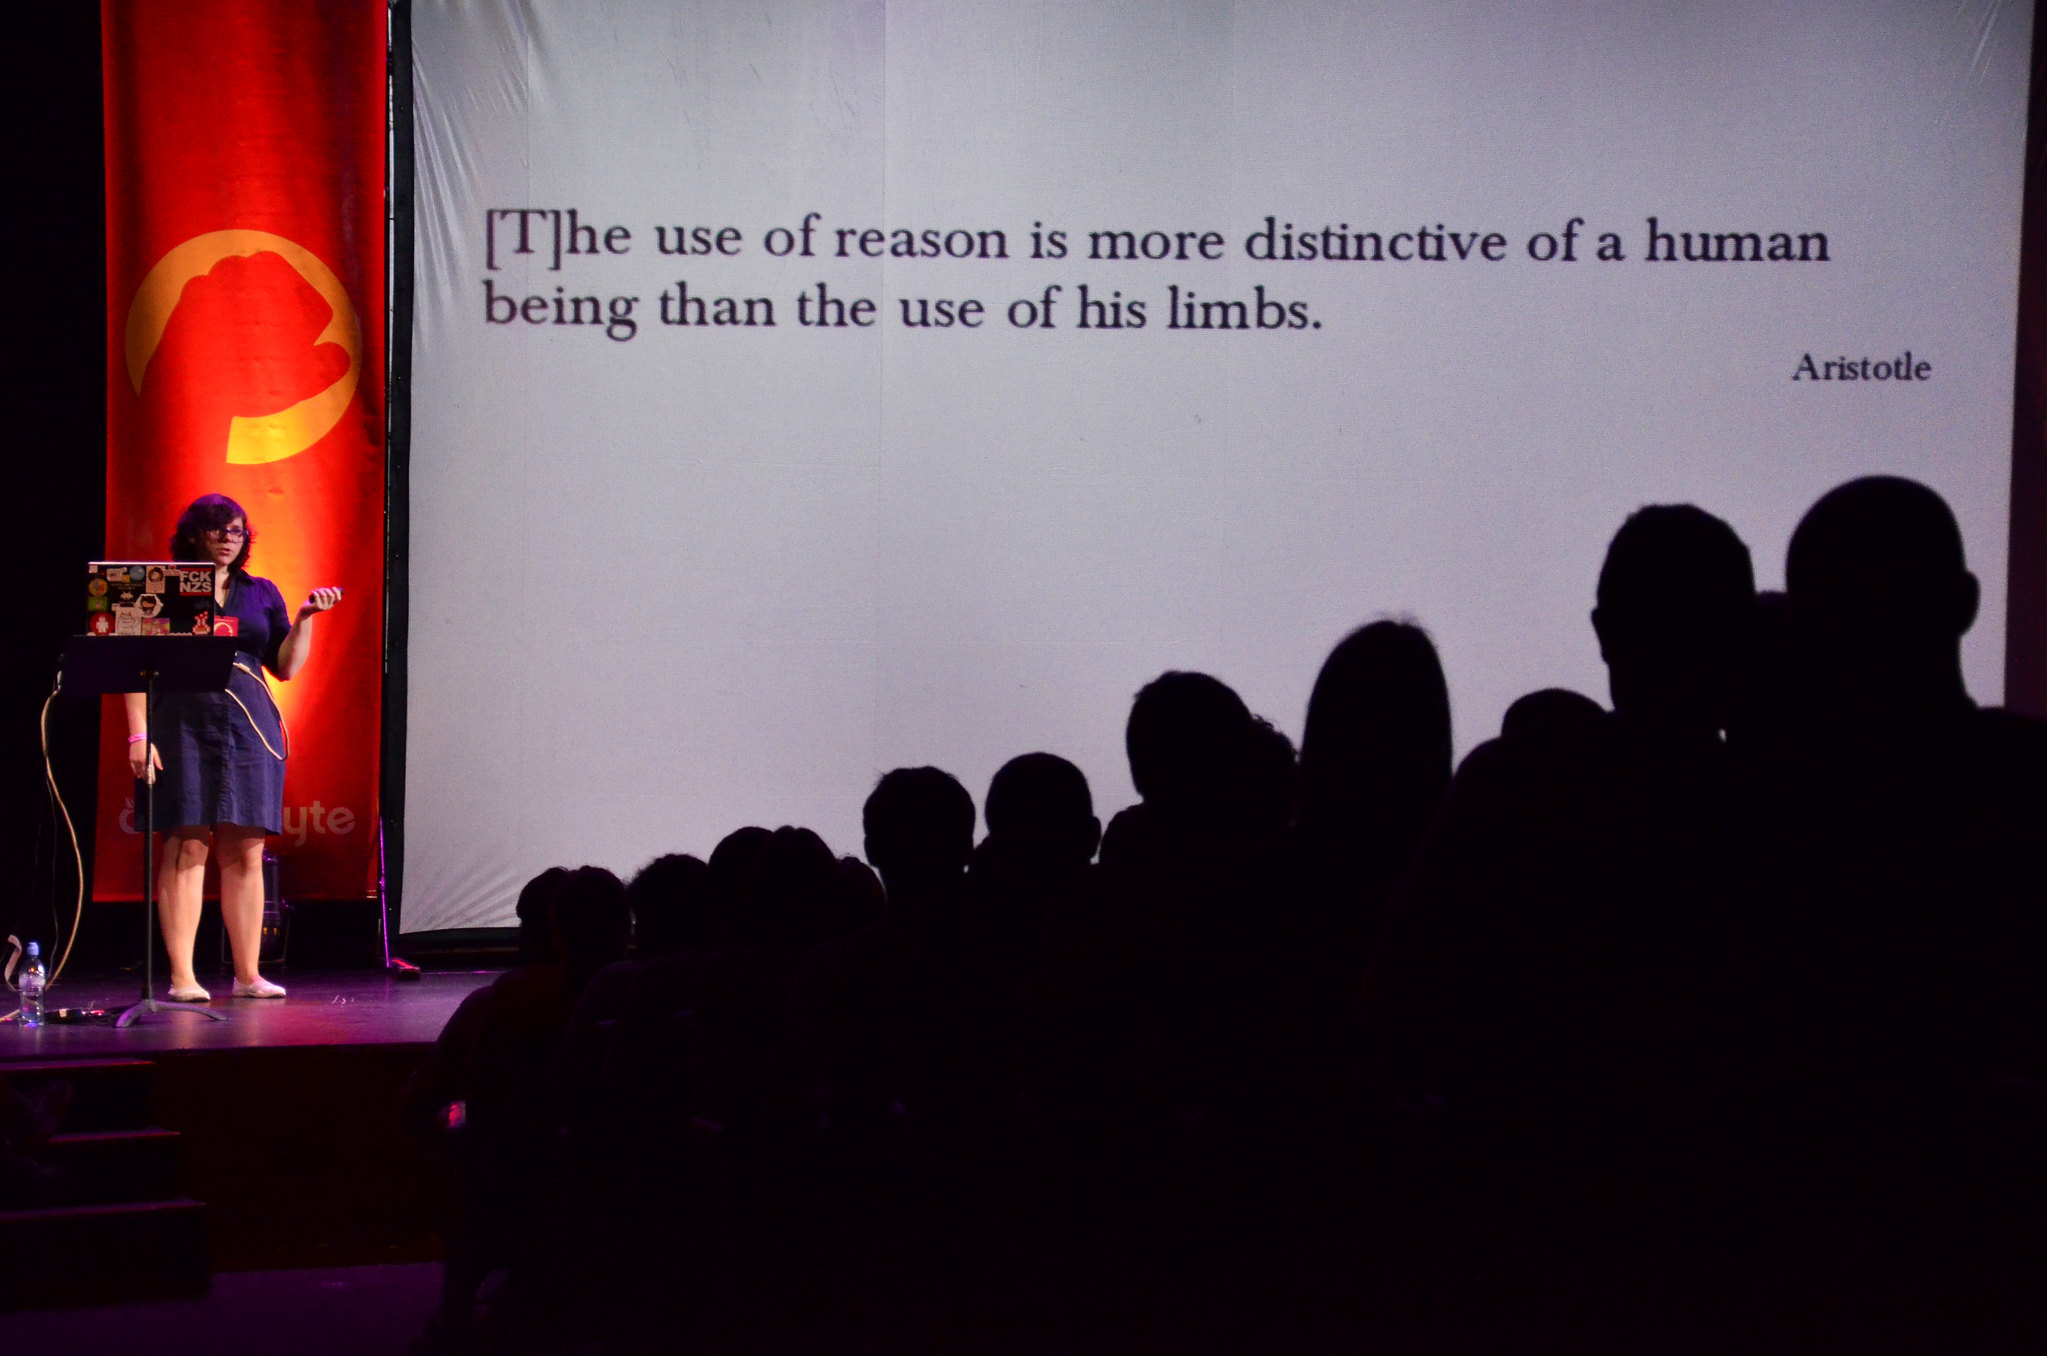 A photo of me on stage at RubyConf Argentina 2014. Behind me there's a screen with a slide that has a quote from Aristotle on it: 'The use of reason is more distinctive of a human being than the use of his limbs'. Image credit: Estela Garcia Fotografa Profesio